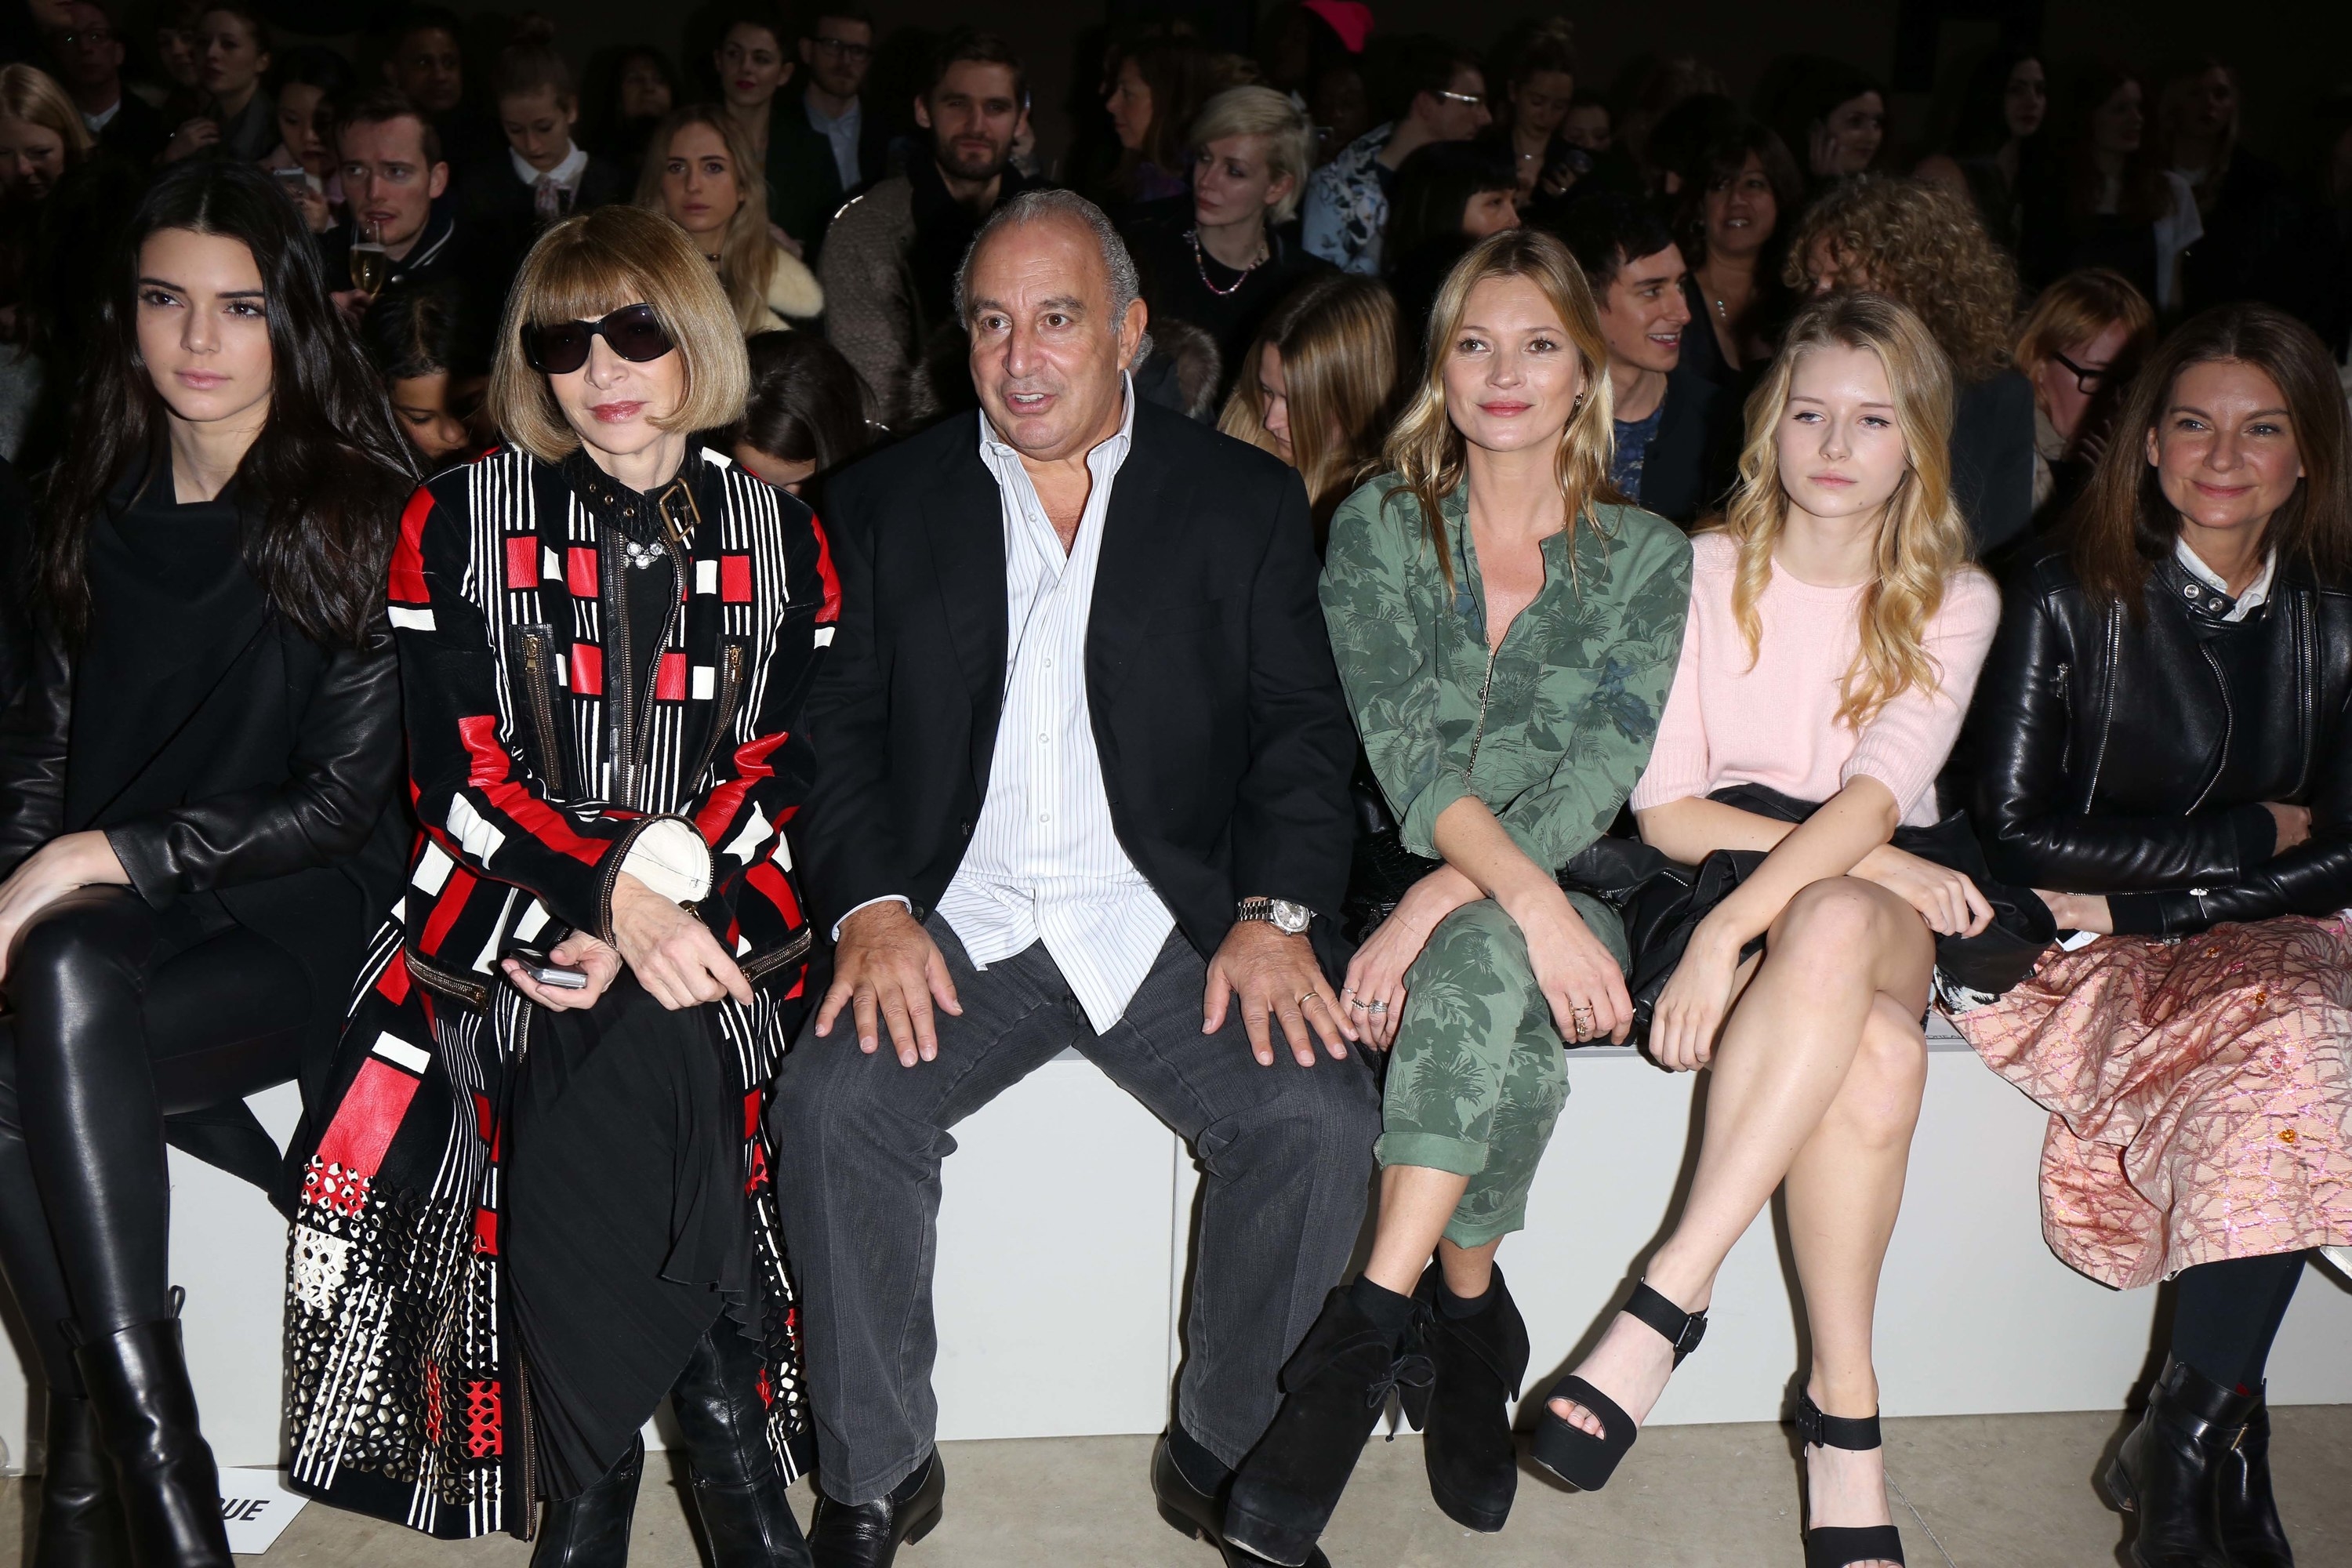 Lottie and Kate sitting with Anna Wintour and others at a fashion show